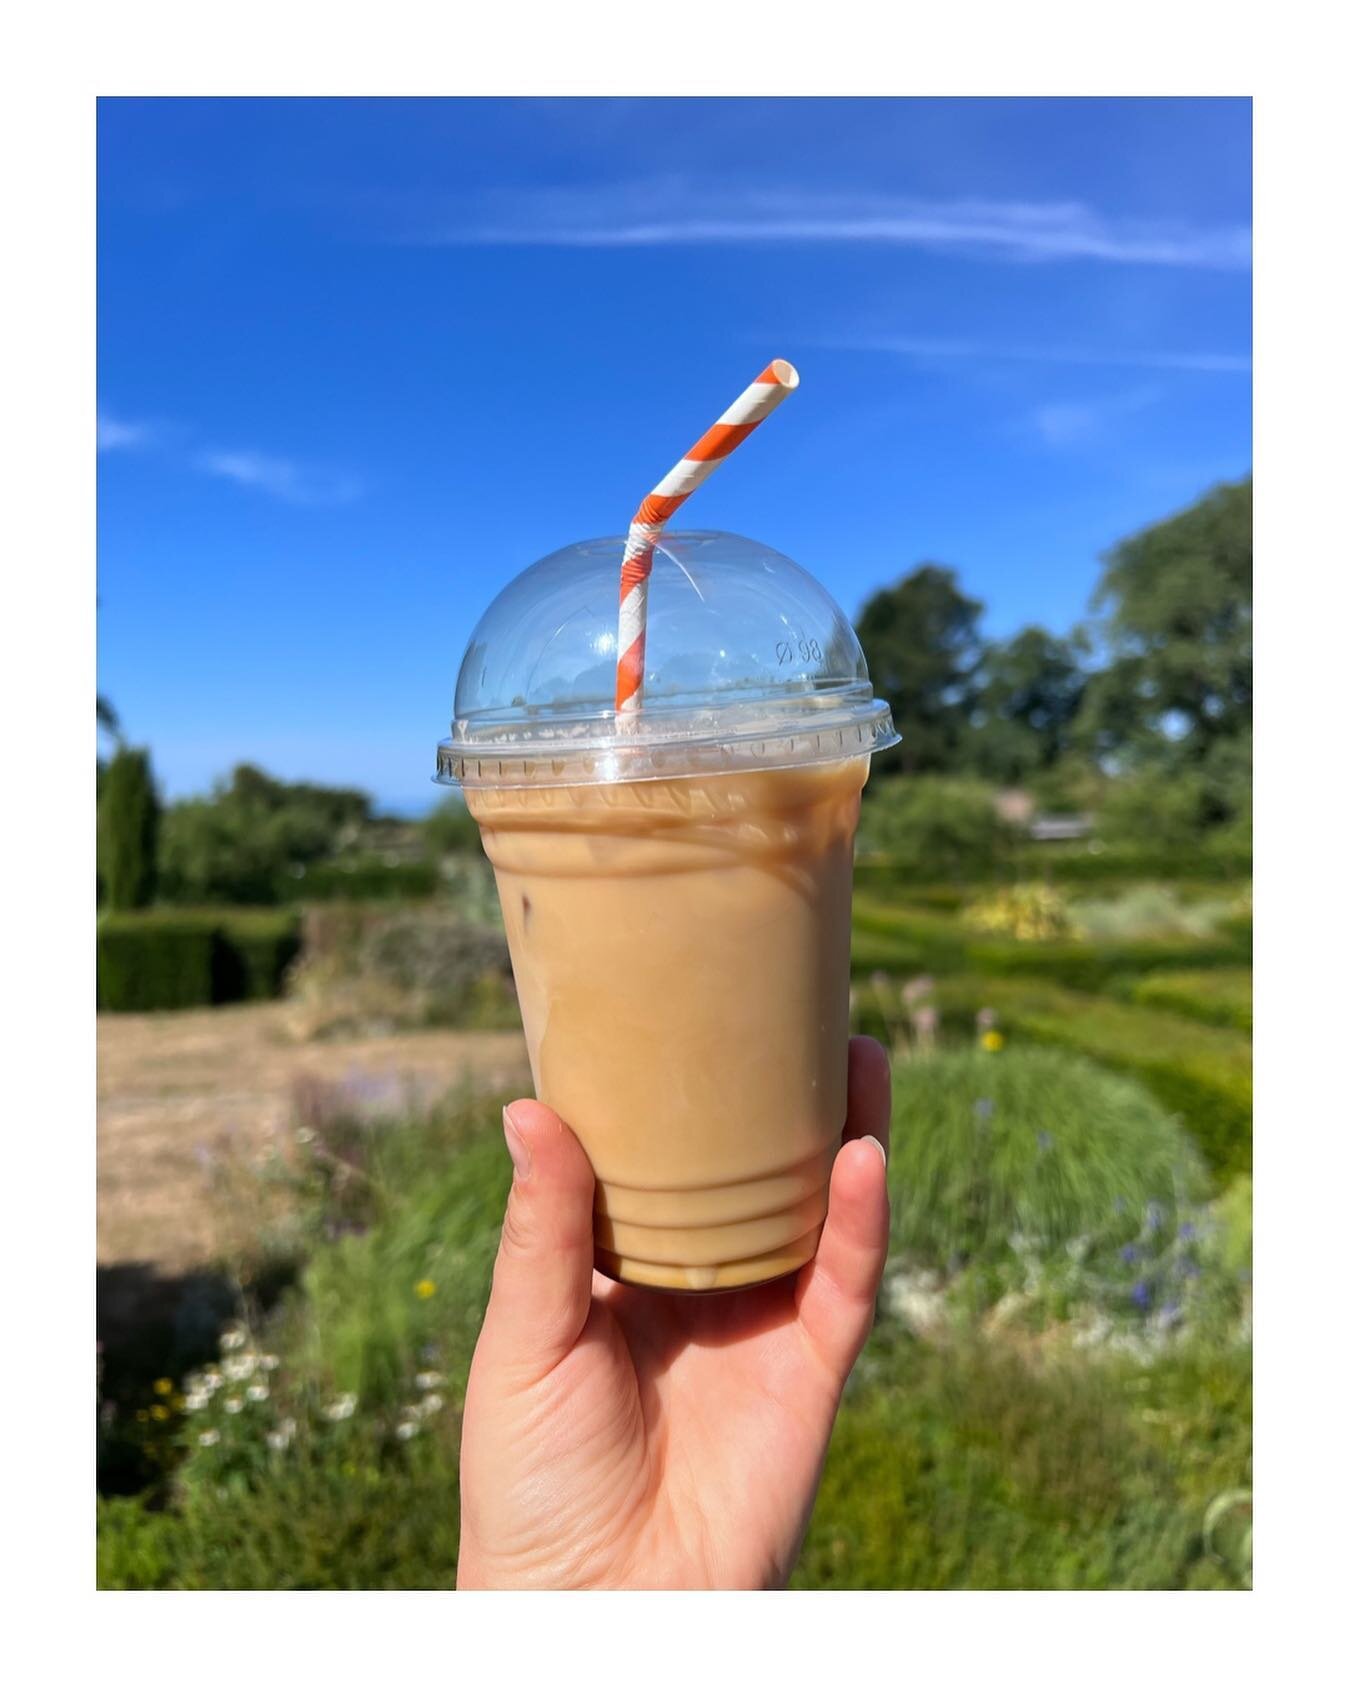 What a beautiful morning!! And even better with a delicious iced latte! 🌞

#icedlatte #heatwave #coffee #iceicebaby #brighton #brightoncoffee #eatinbrighton #summer #brightoncafe #cafe #takaway